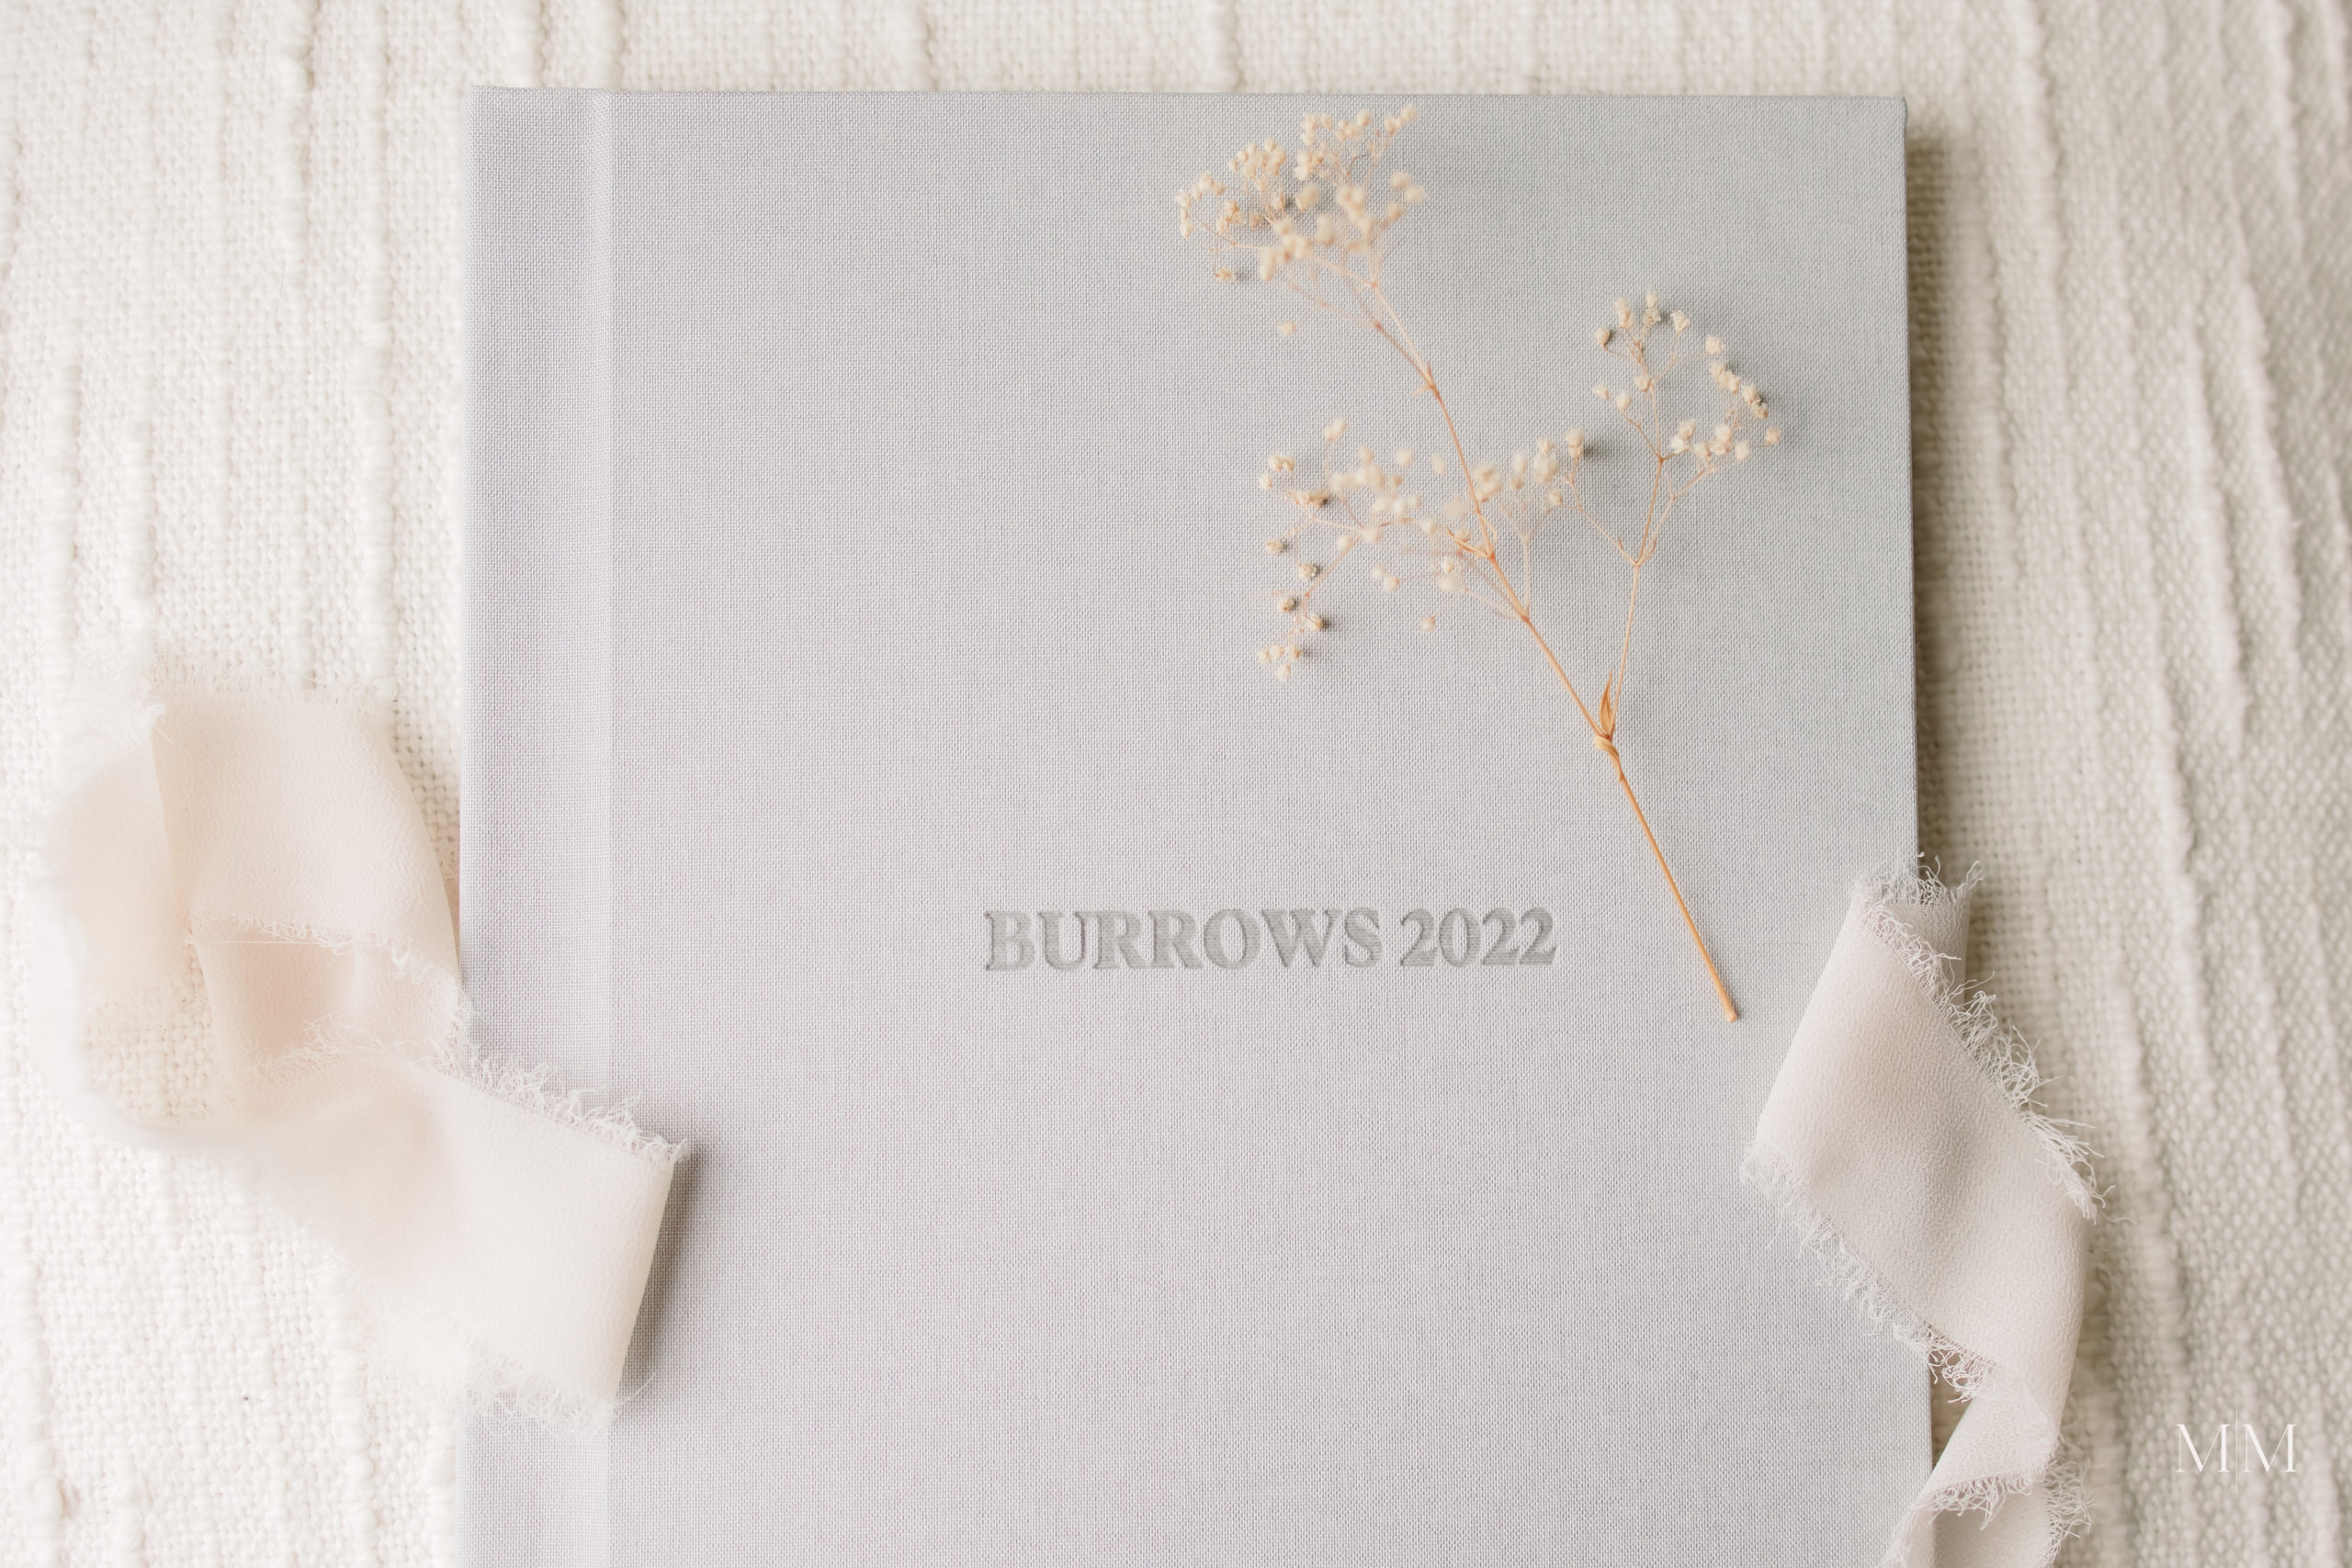 Louisville maternity photographers | Beautiful custom maternity album with gray cover and debossed lettering